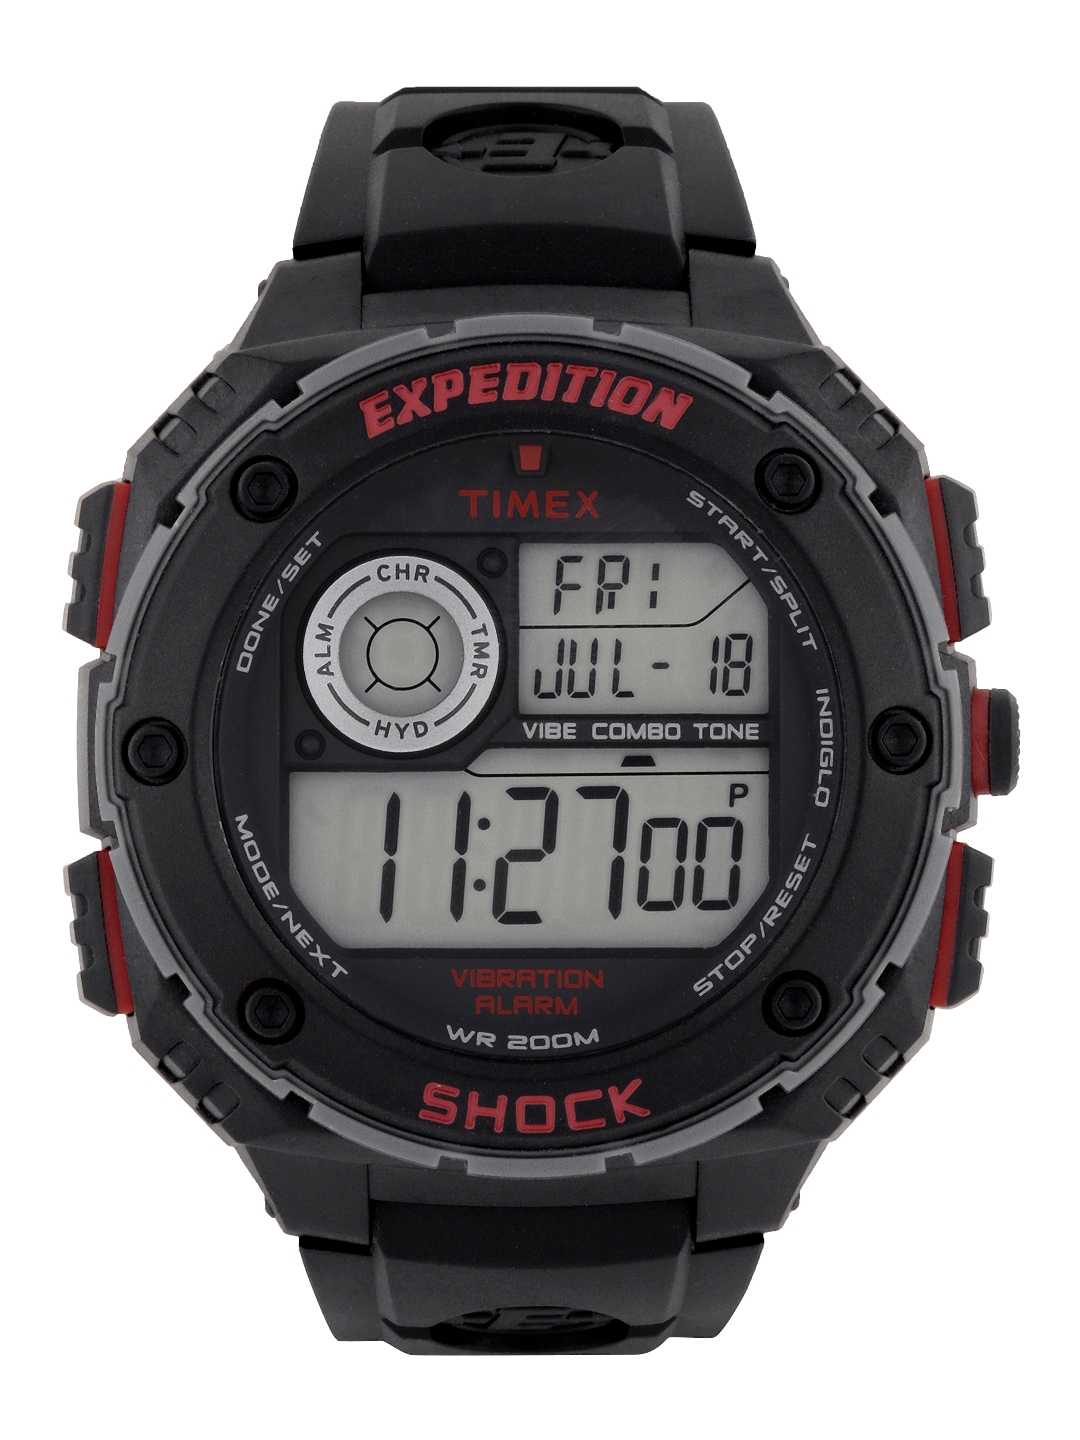 For 1498/-(75% Off) 75% off on Timex Expedition Men Black Digital Watch T49980 at Myntra